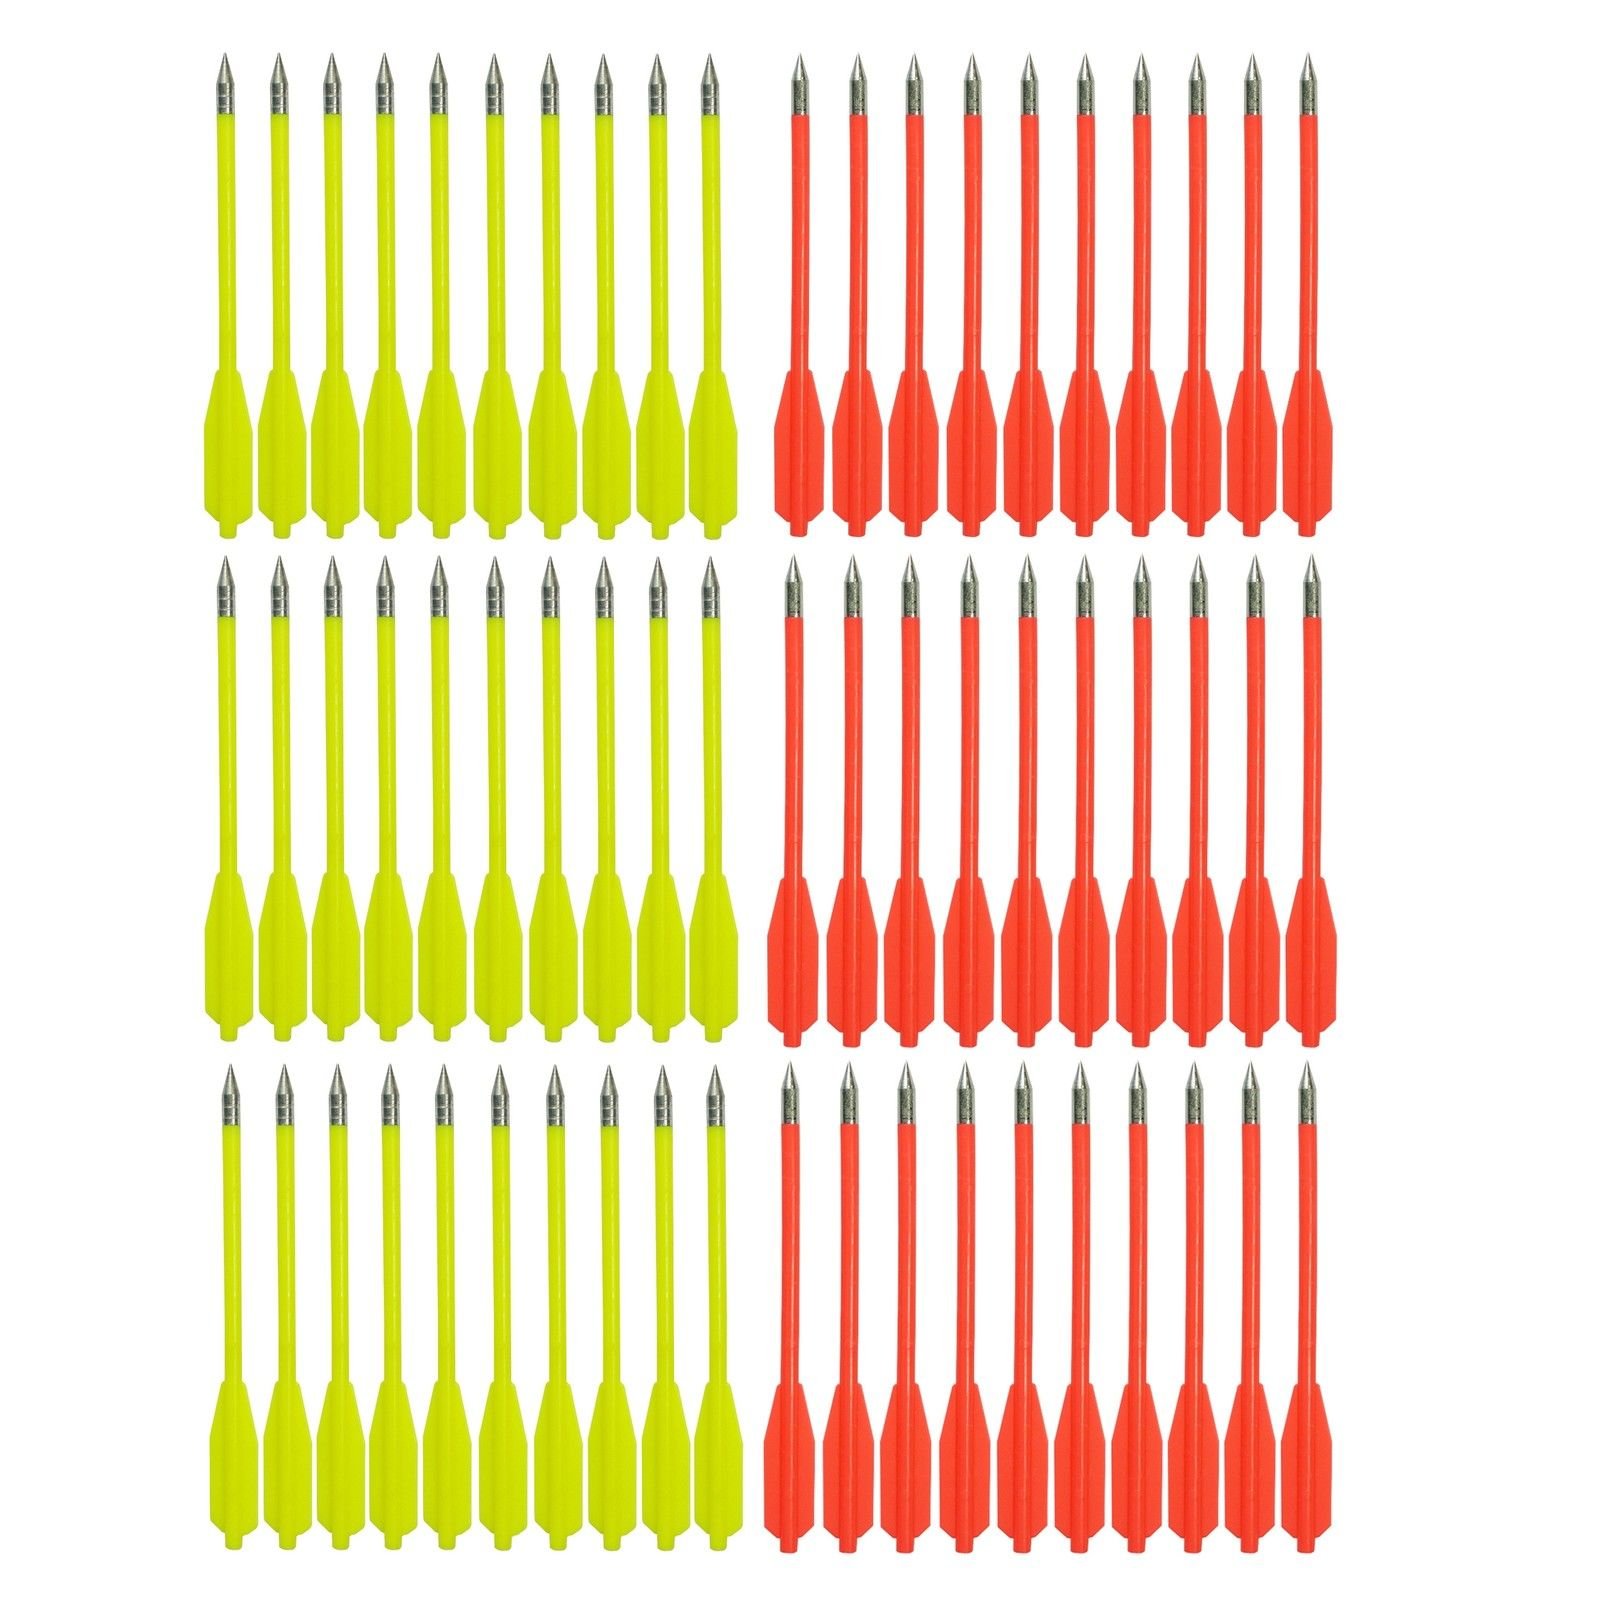 SPEED TRACK 60PCS 6.25 Inch 50-80LB Mini Archery Crossbow Bolts Set with  Sharp Metal Tip